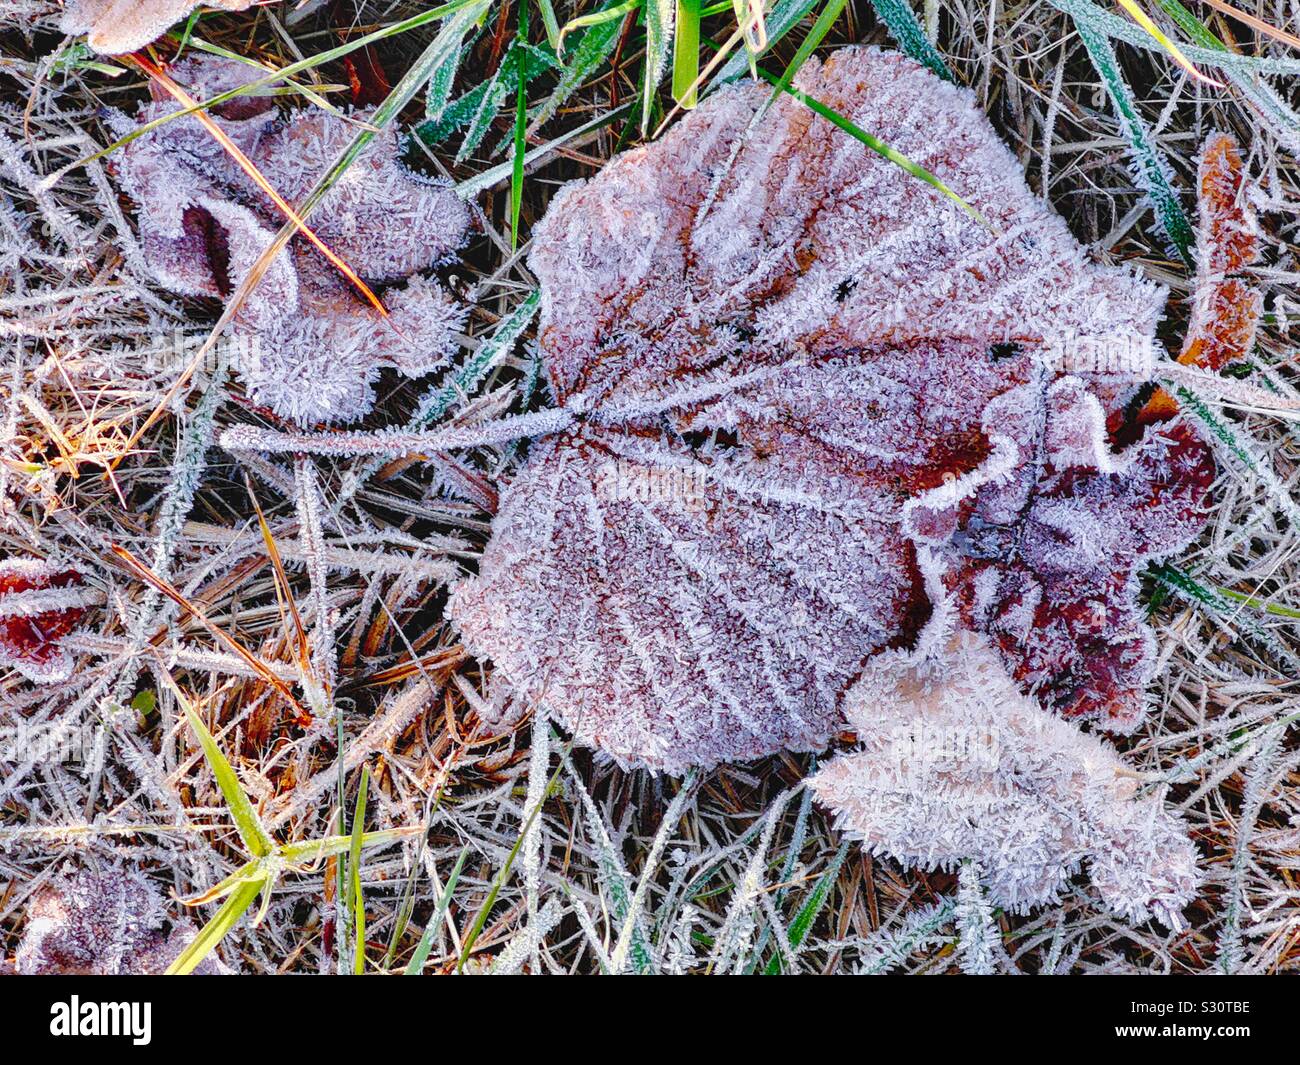 Frozen autumn leaves covered in ice frost as seasons change from autumn to winter, Sweden Stock Photo